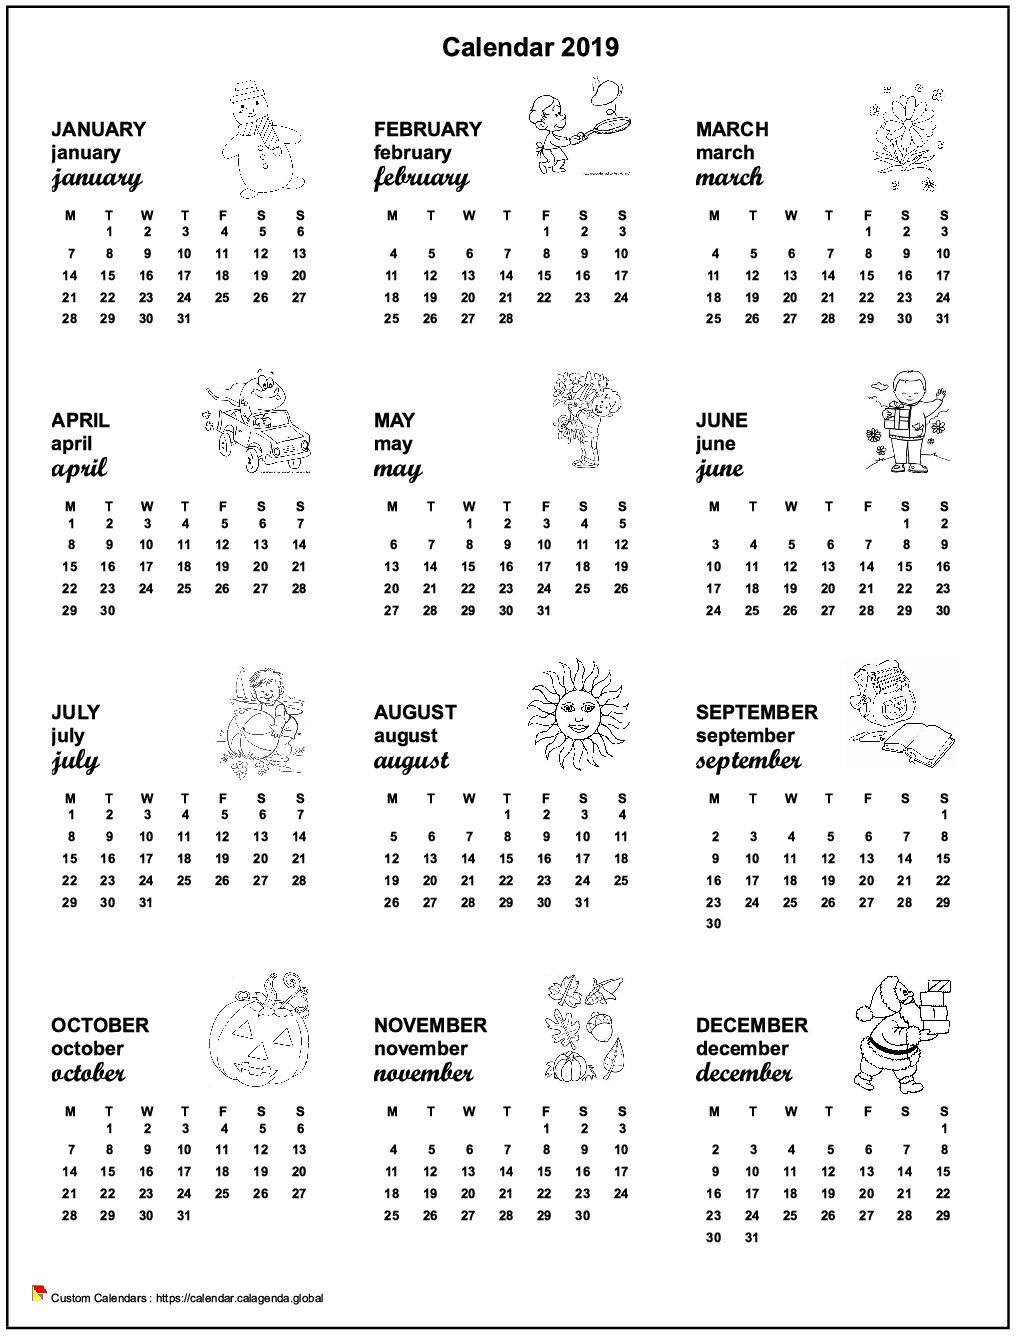 Calendar 2019 annual maternal and primary school